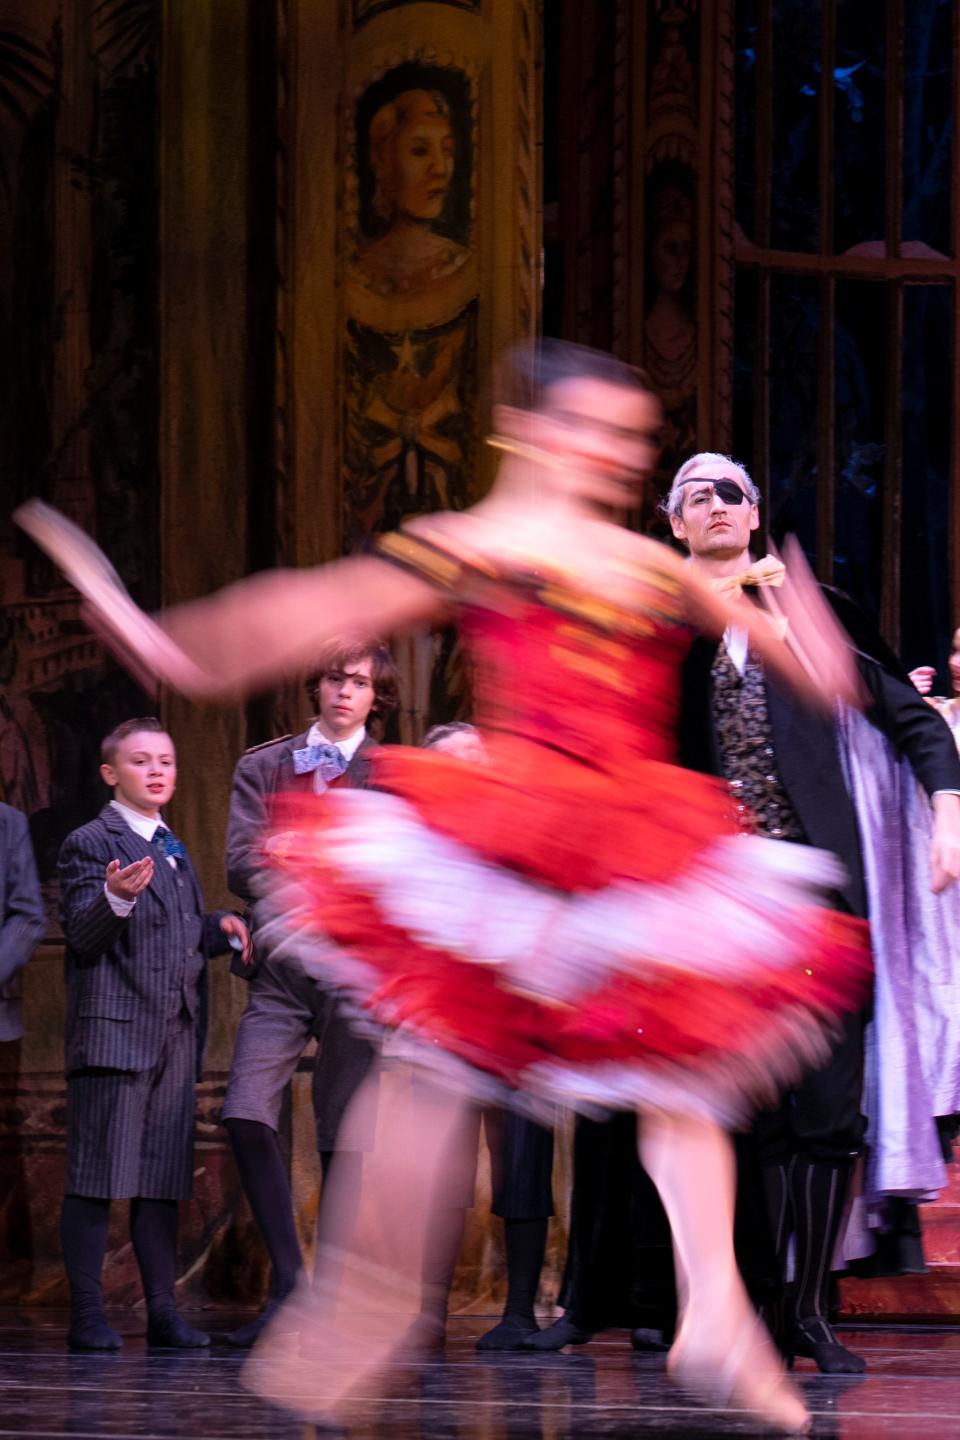 Herr Drosselmeyer, played by Austin Powers, wearing an eyepatch, watches the Spanish Doll, played by Francesca Dugarte, leap across the stage during a preview rehearsal for BalletMet’s performance of "The Nutcracker" at the Ohio Theatre.